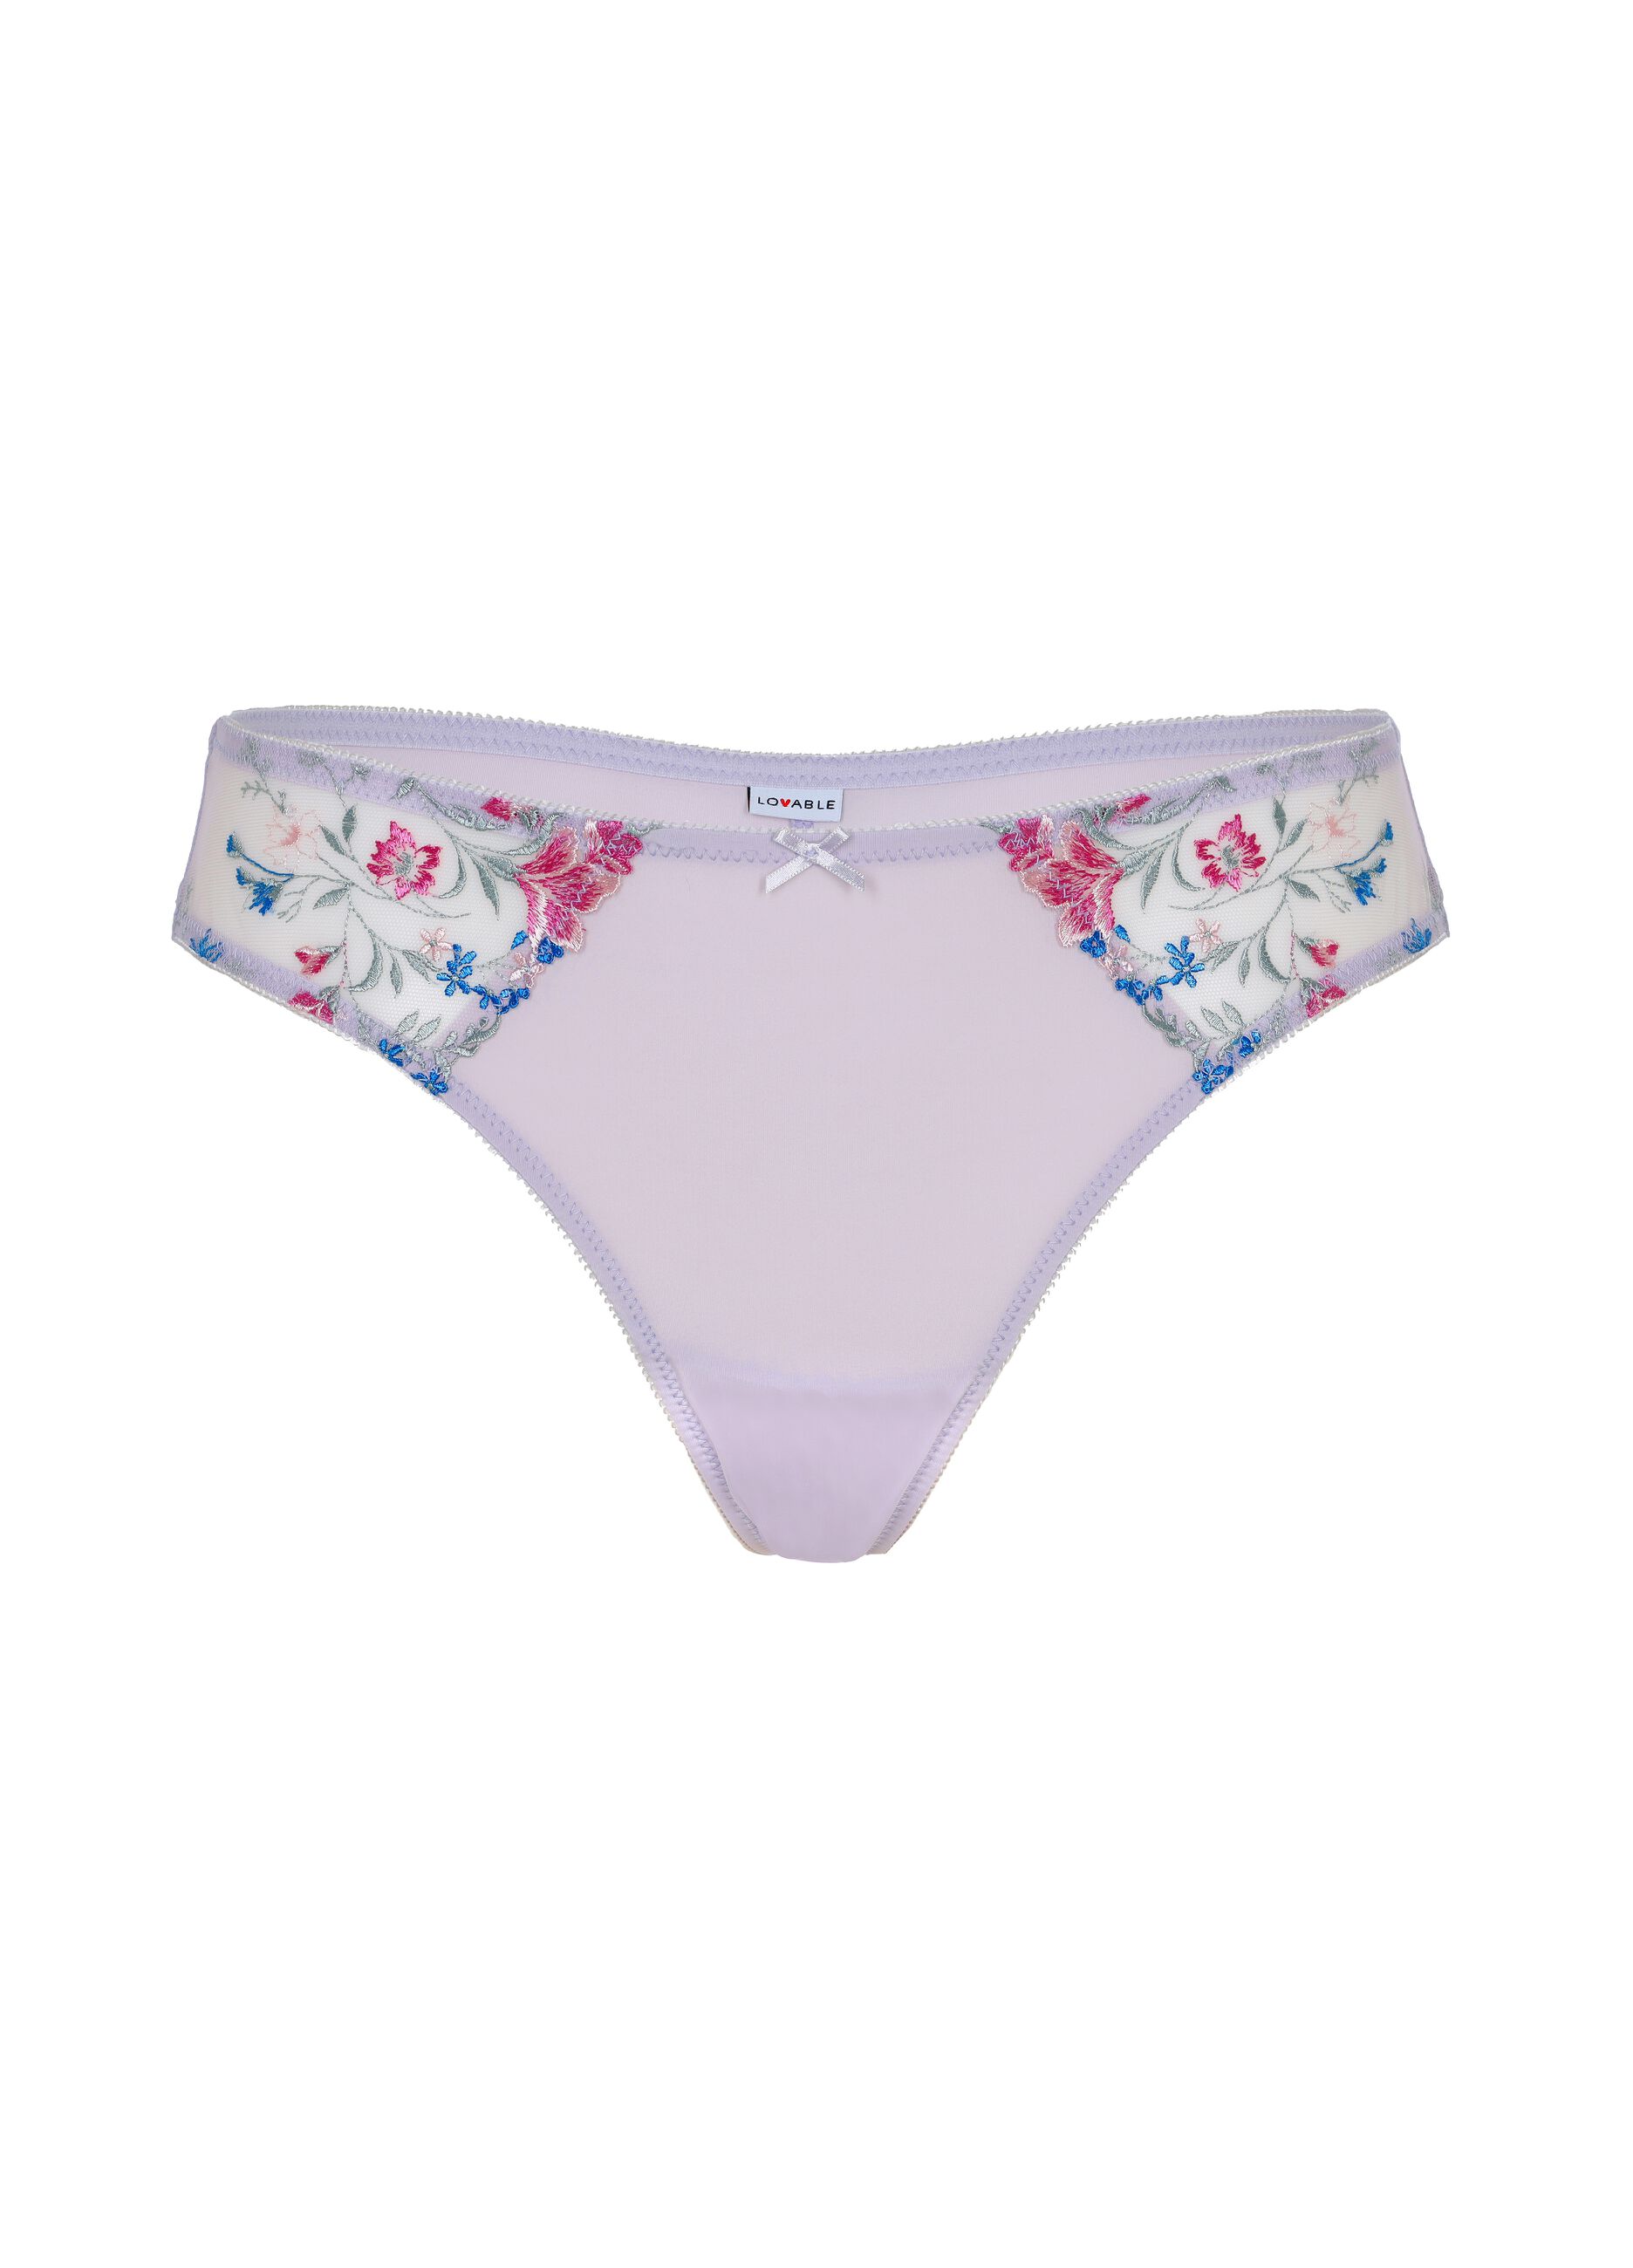 Embroidered lace Brazilian-cut briefs with floral embroidery